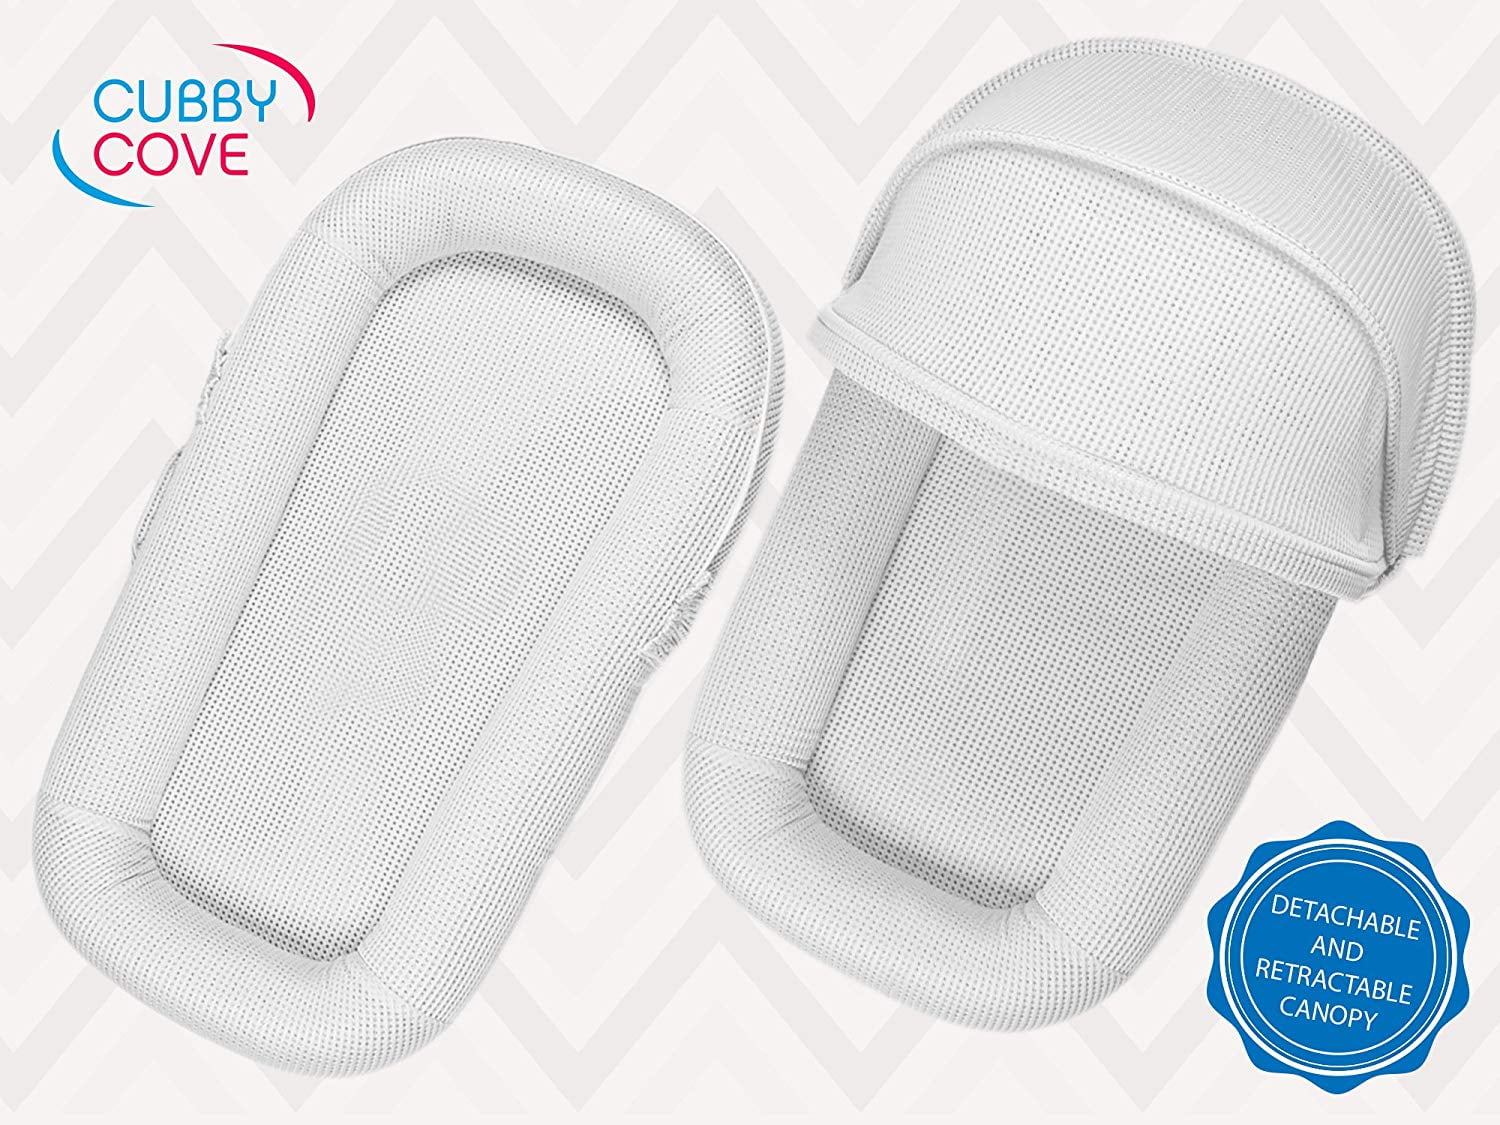 Tummy Time and Playing; Canopy Included The New CubbyCove Travel White Travel Extra Soft Nest for Cosleeping Now Foldable and Super Portable The Truly Breathable Baby Lounger 